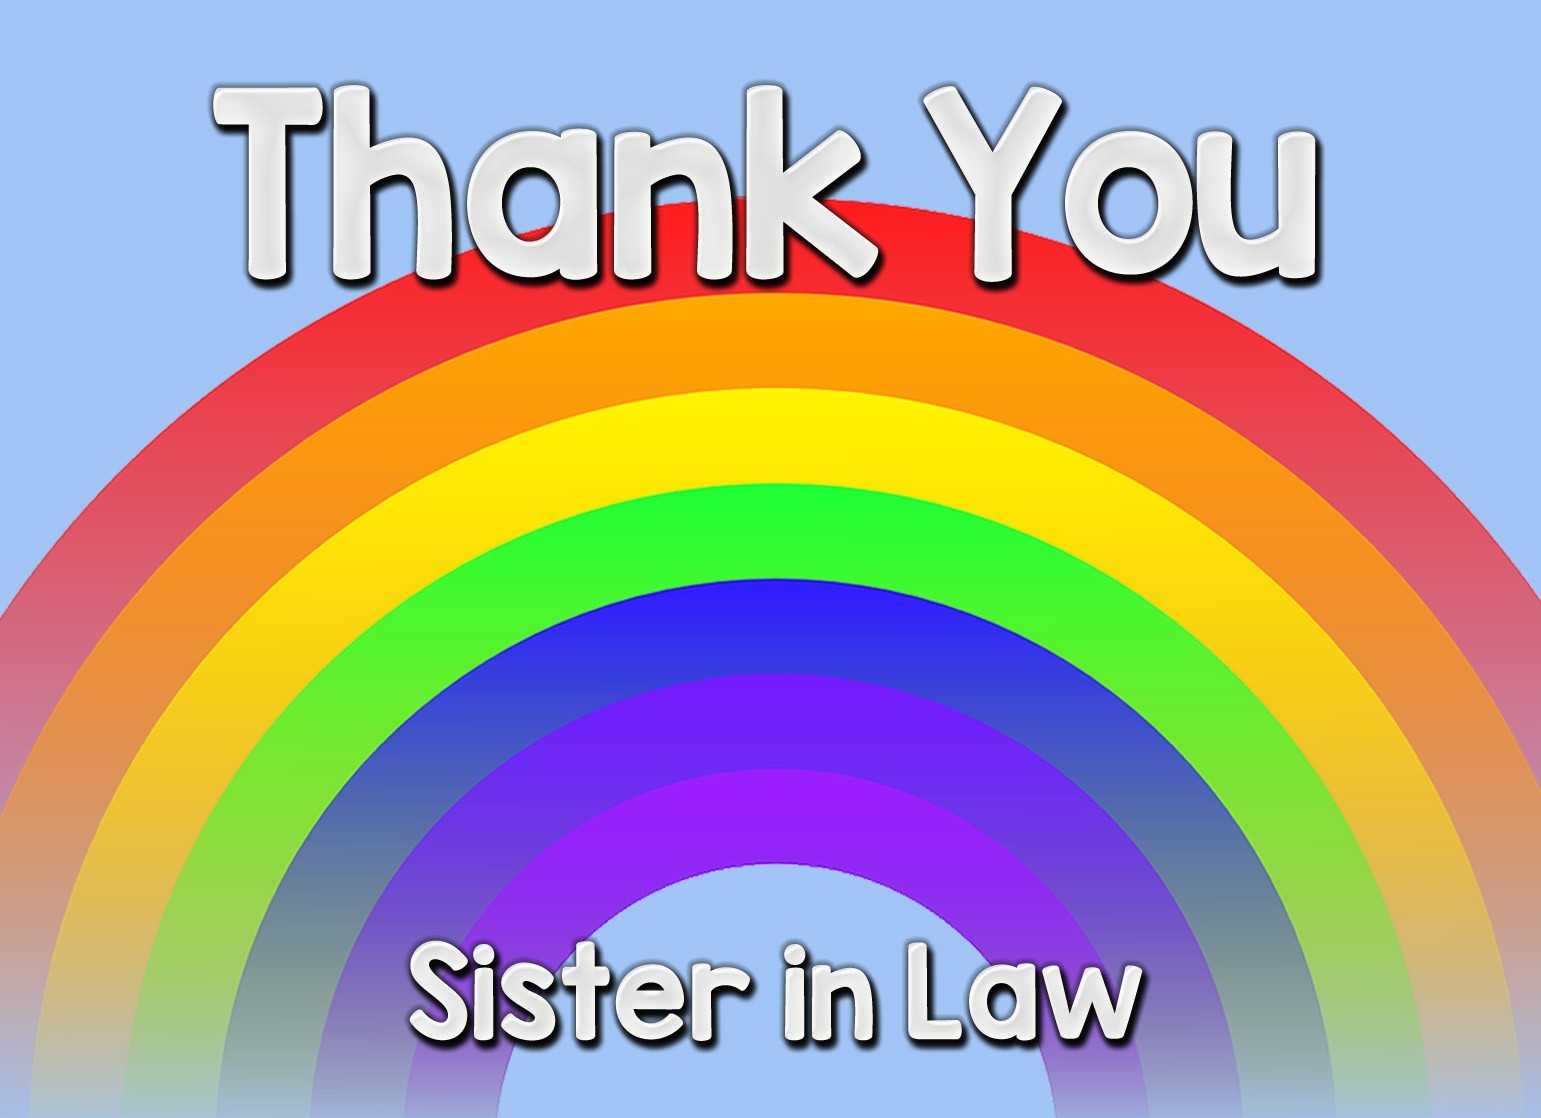 Thank You 'Sister in Law' Rainbow Greeting Card